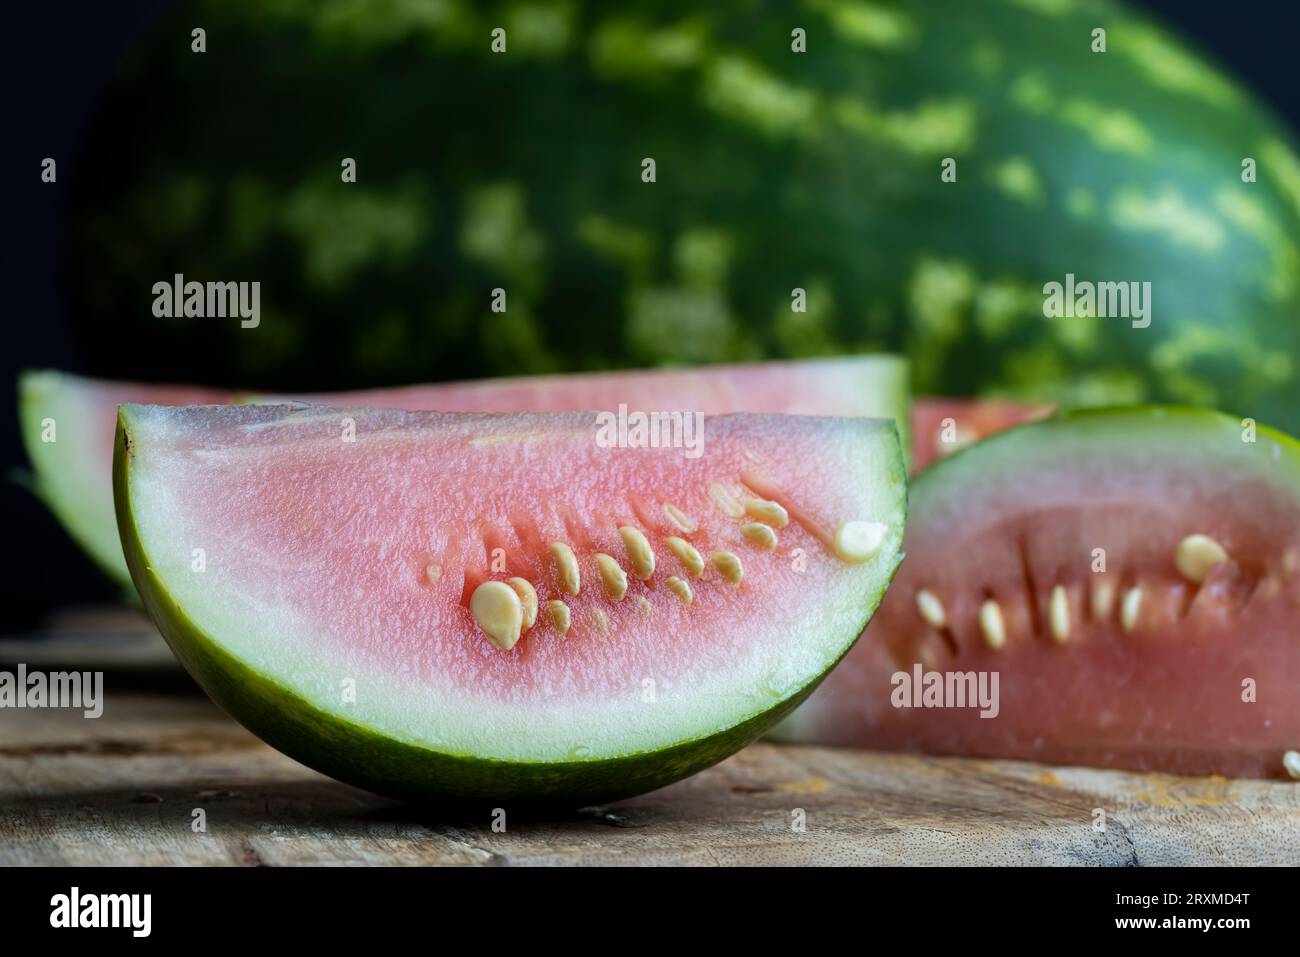 Unripe watermelon of small size with large white seeds and light pink flesh, not sweet not ripe cut watermelon Stock Photo